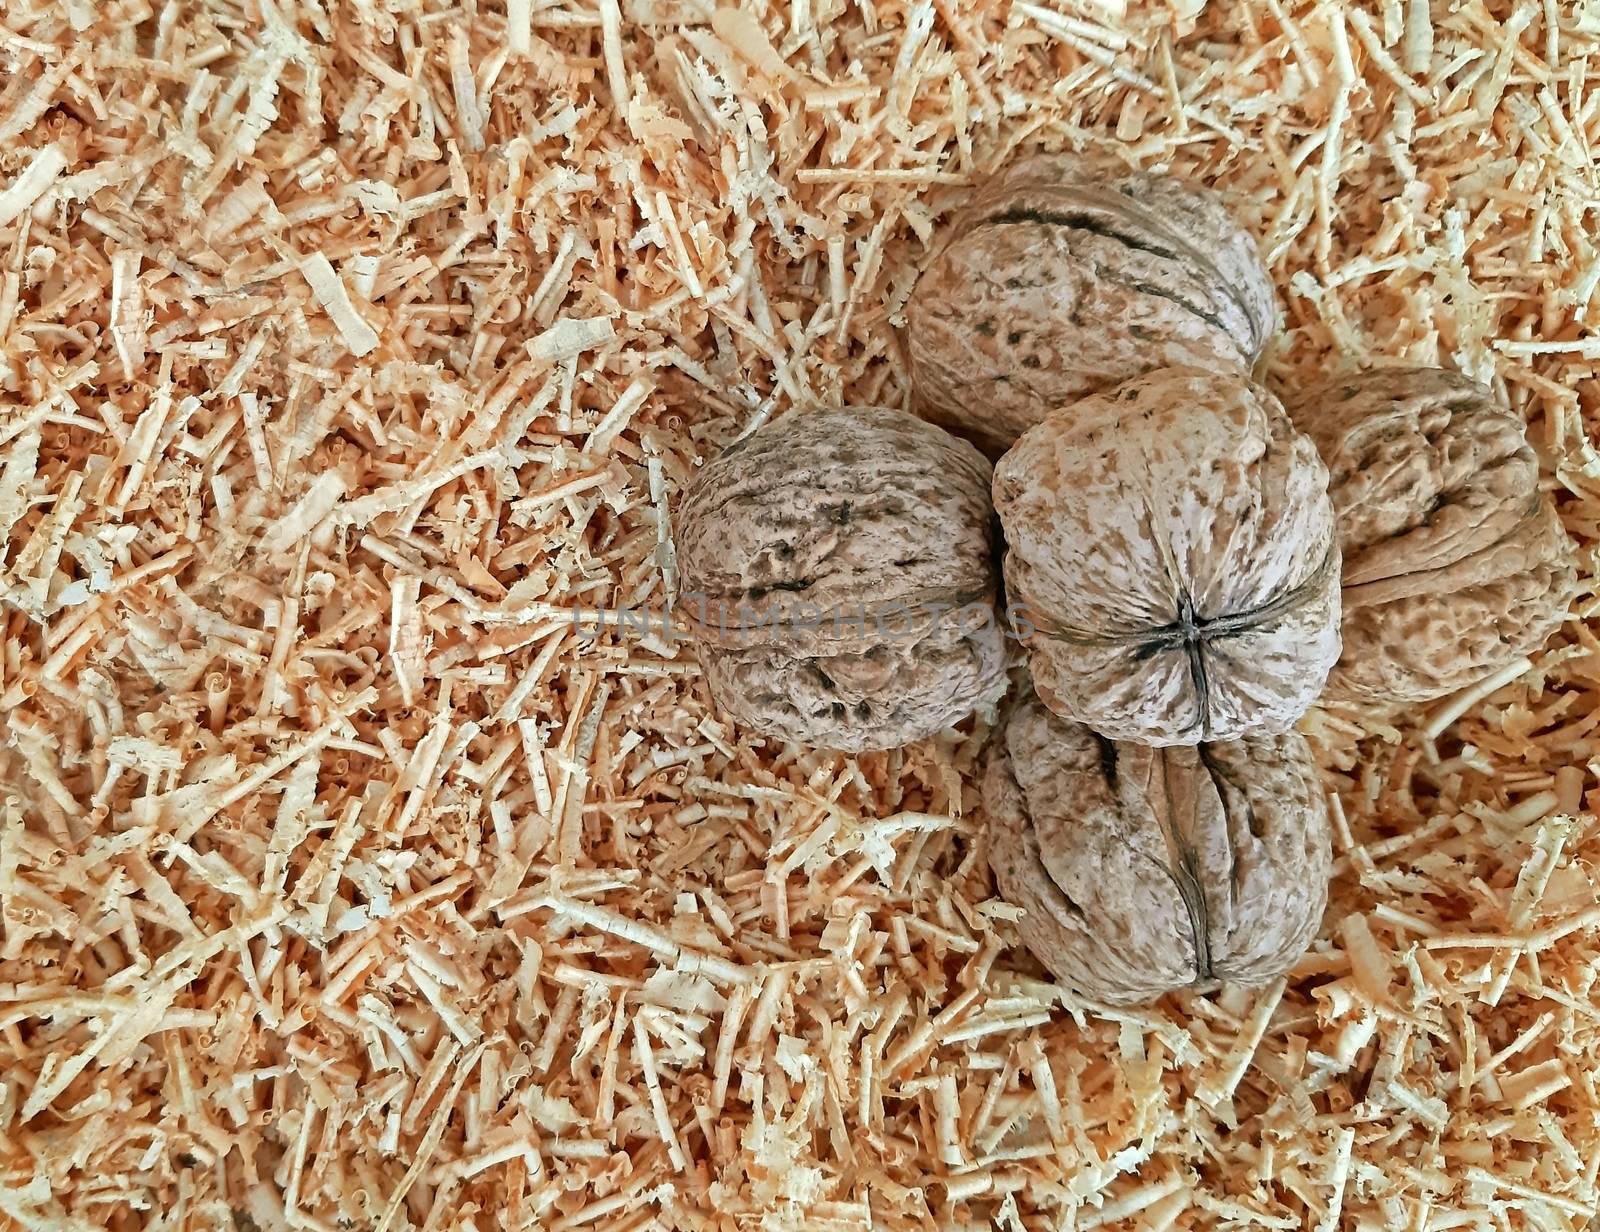 Some big walnuts on a sawdust background close up